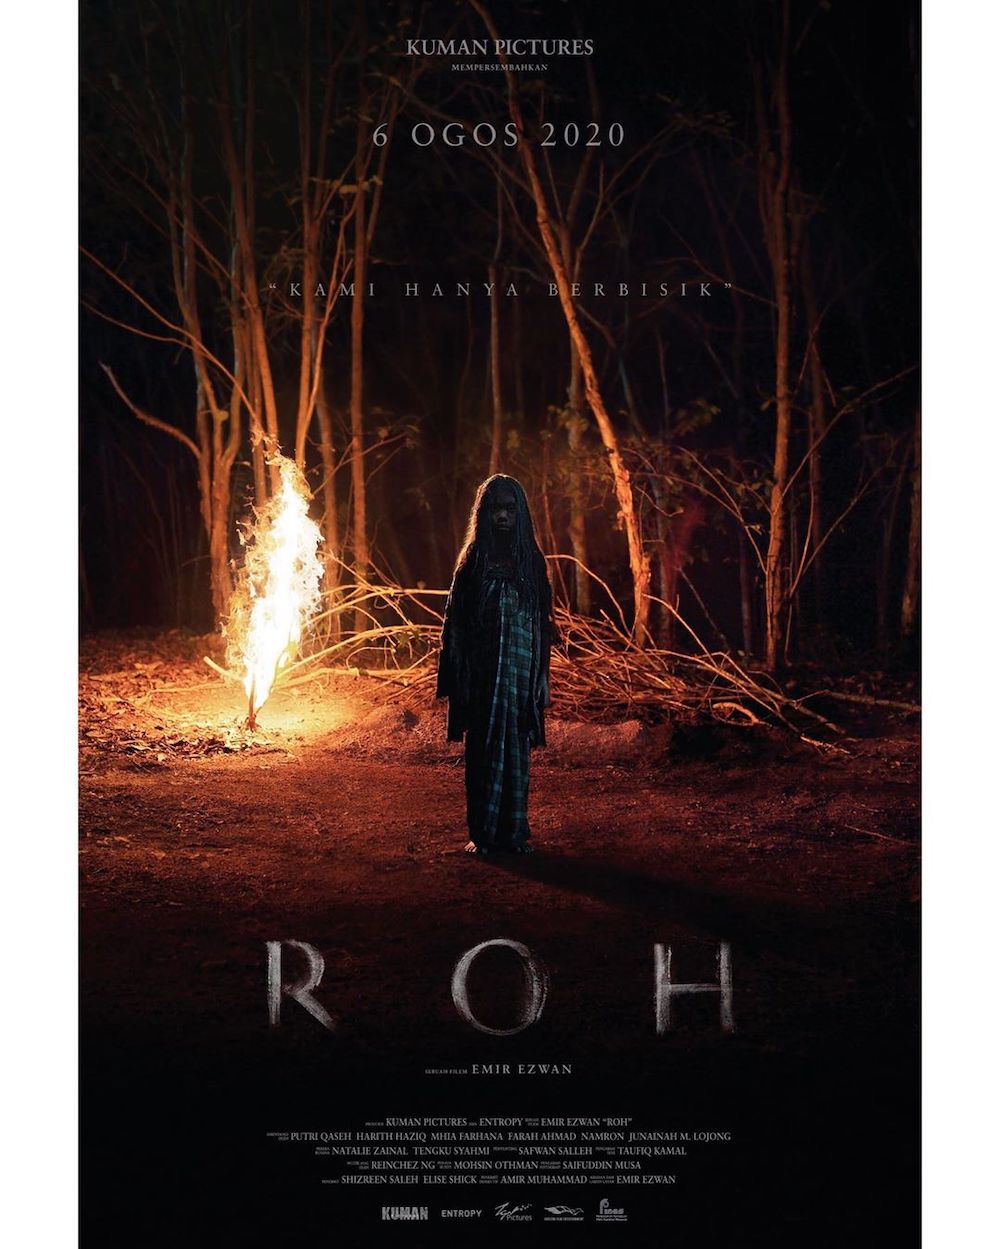 Horror film, Roh will hit cinema screens nationwide this August 6. — photo courtesy of Instagram/ Kuman Pictures